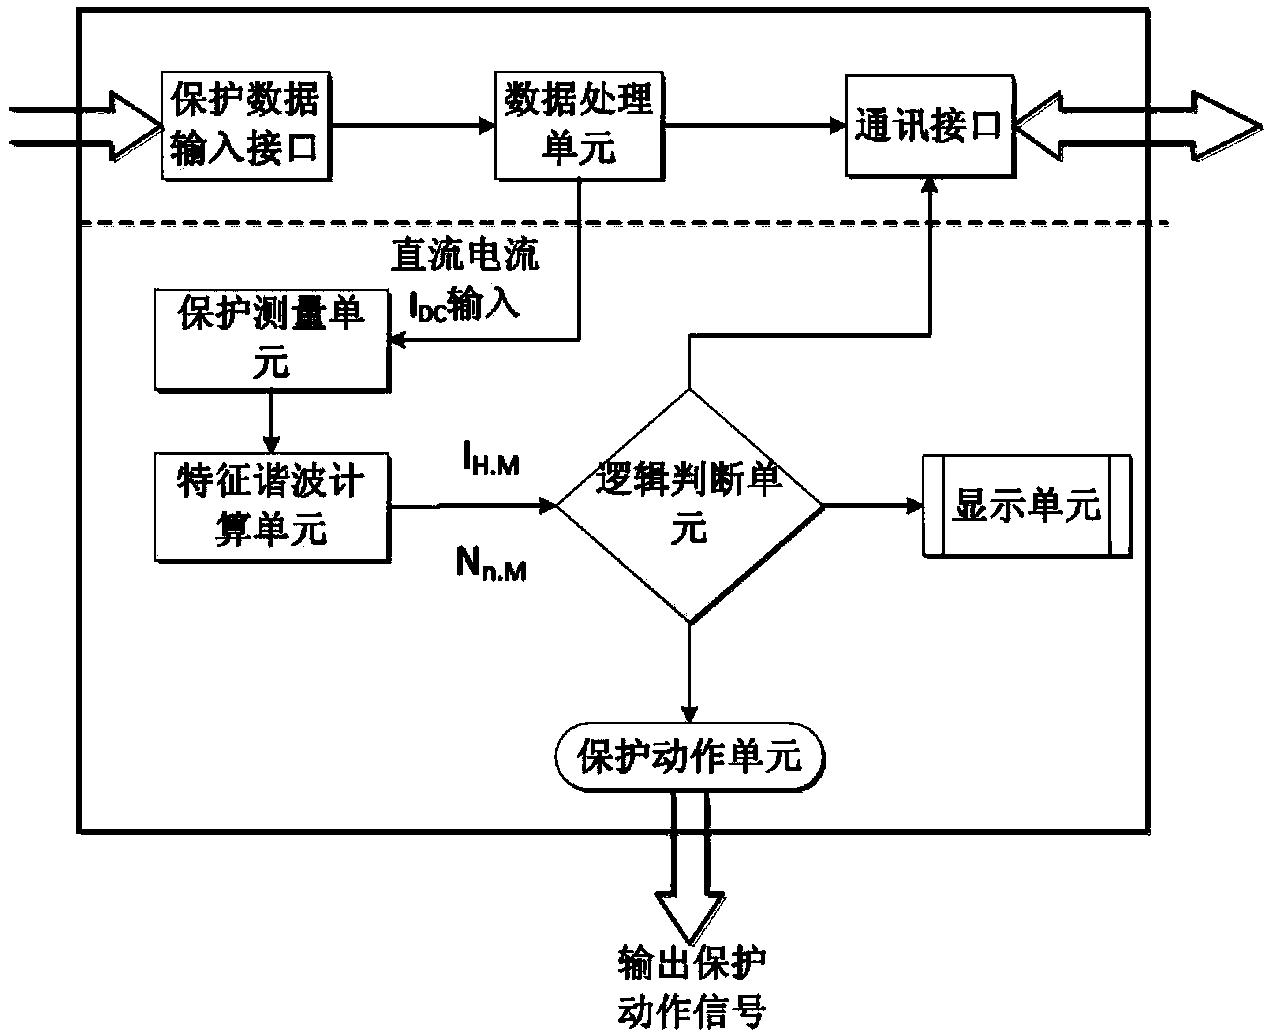 Characteristic-harmonic-based protection method and system for high-voltage direct current transmission line